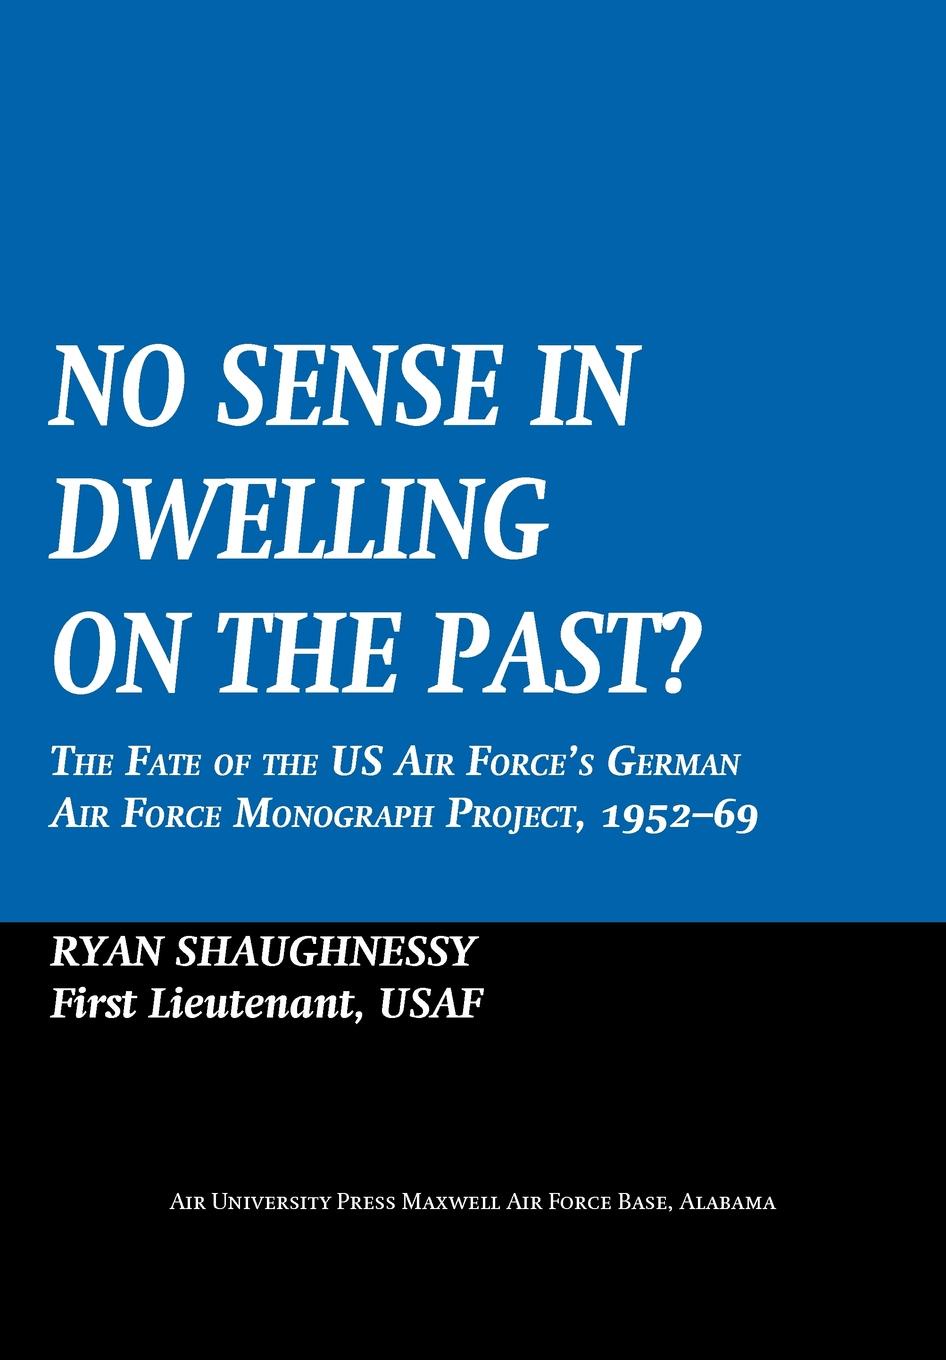 No Sense Dwelling in the Past. The Fate of the US Air Force.s German Air Force Monograph Project, 1952-1969